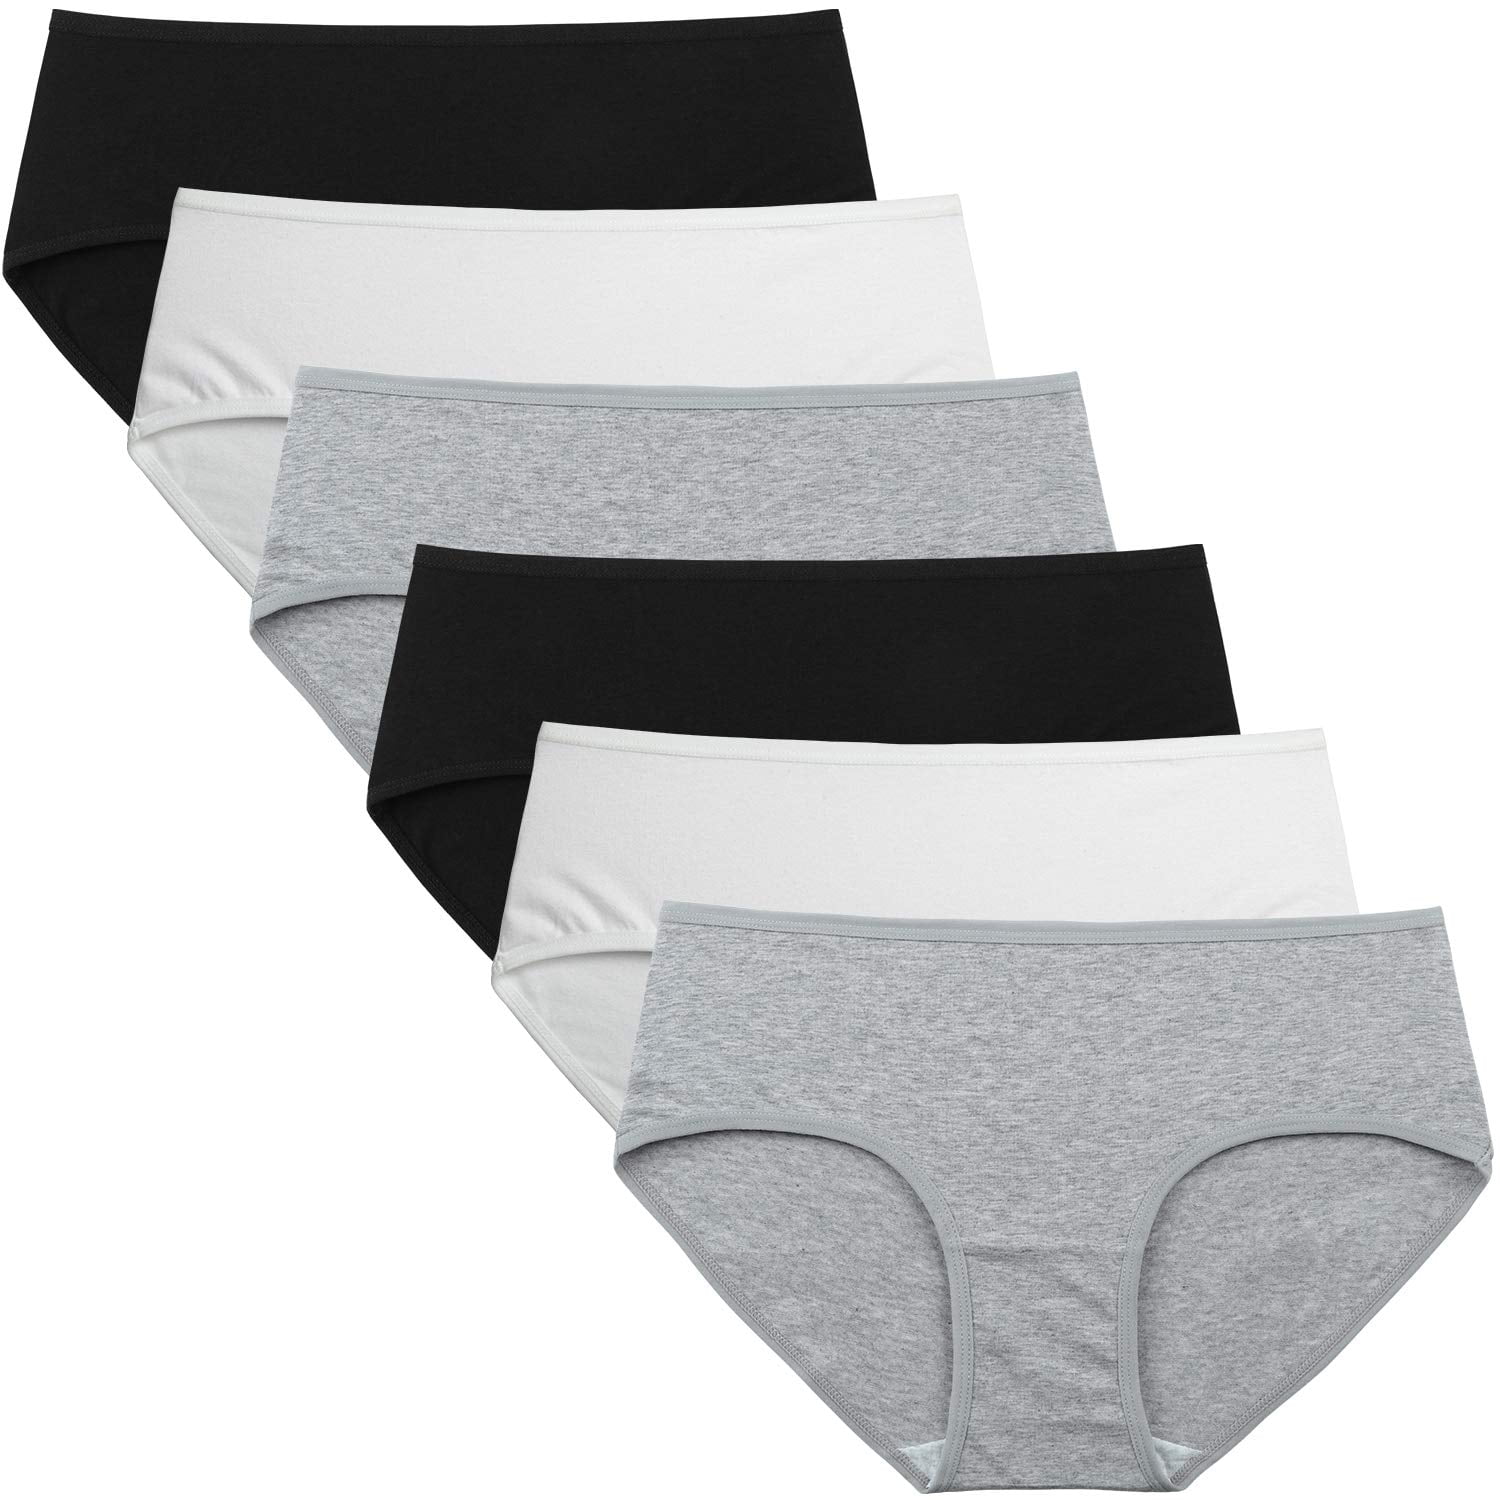 INNERSY Womens Underwear Packs Cotton Hipster Panties Mid/Low Rise 6-Pack  (S, Bright) 